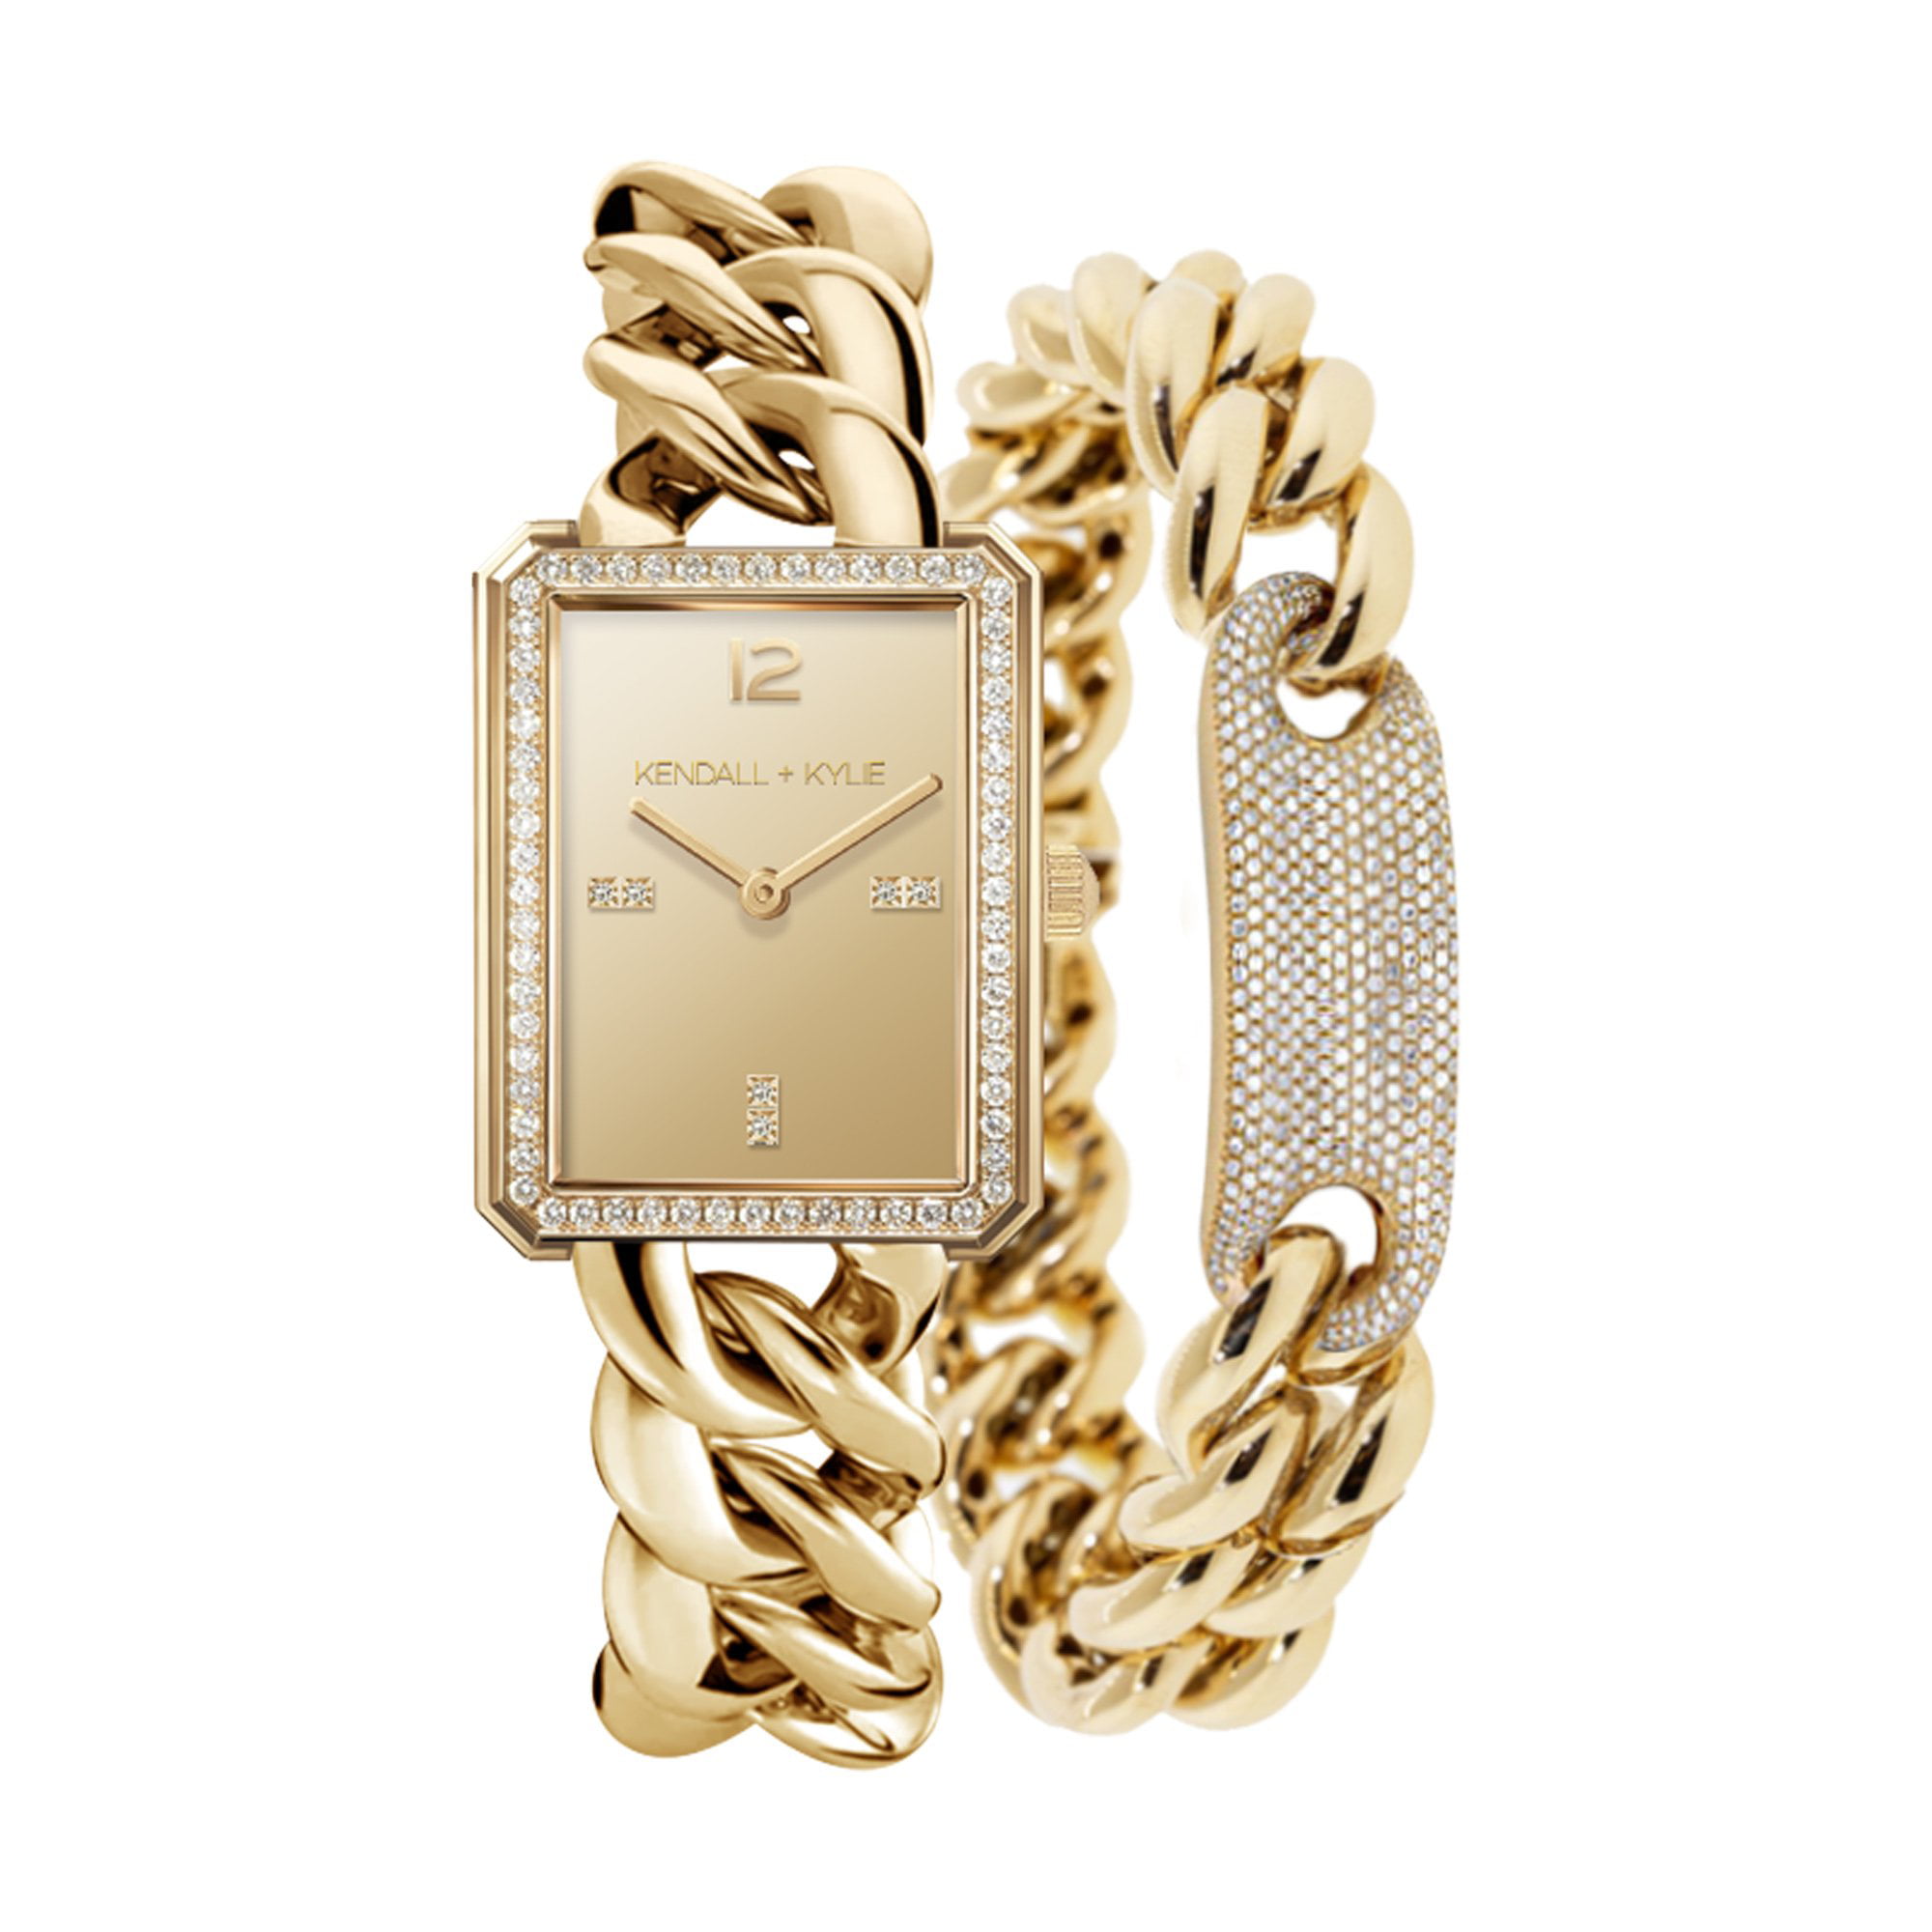 Kendall + Kylie - Kendall + Kylie: Women's Chunky Chain Analog Watch ...